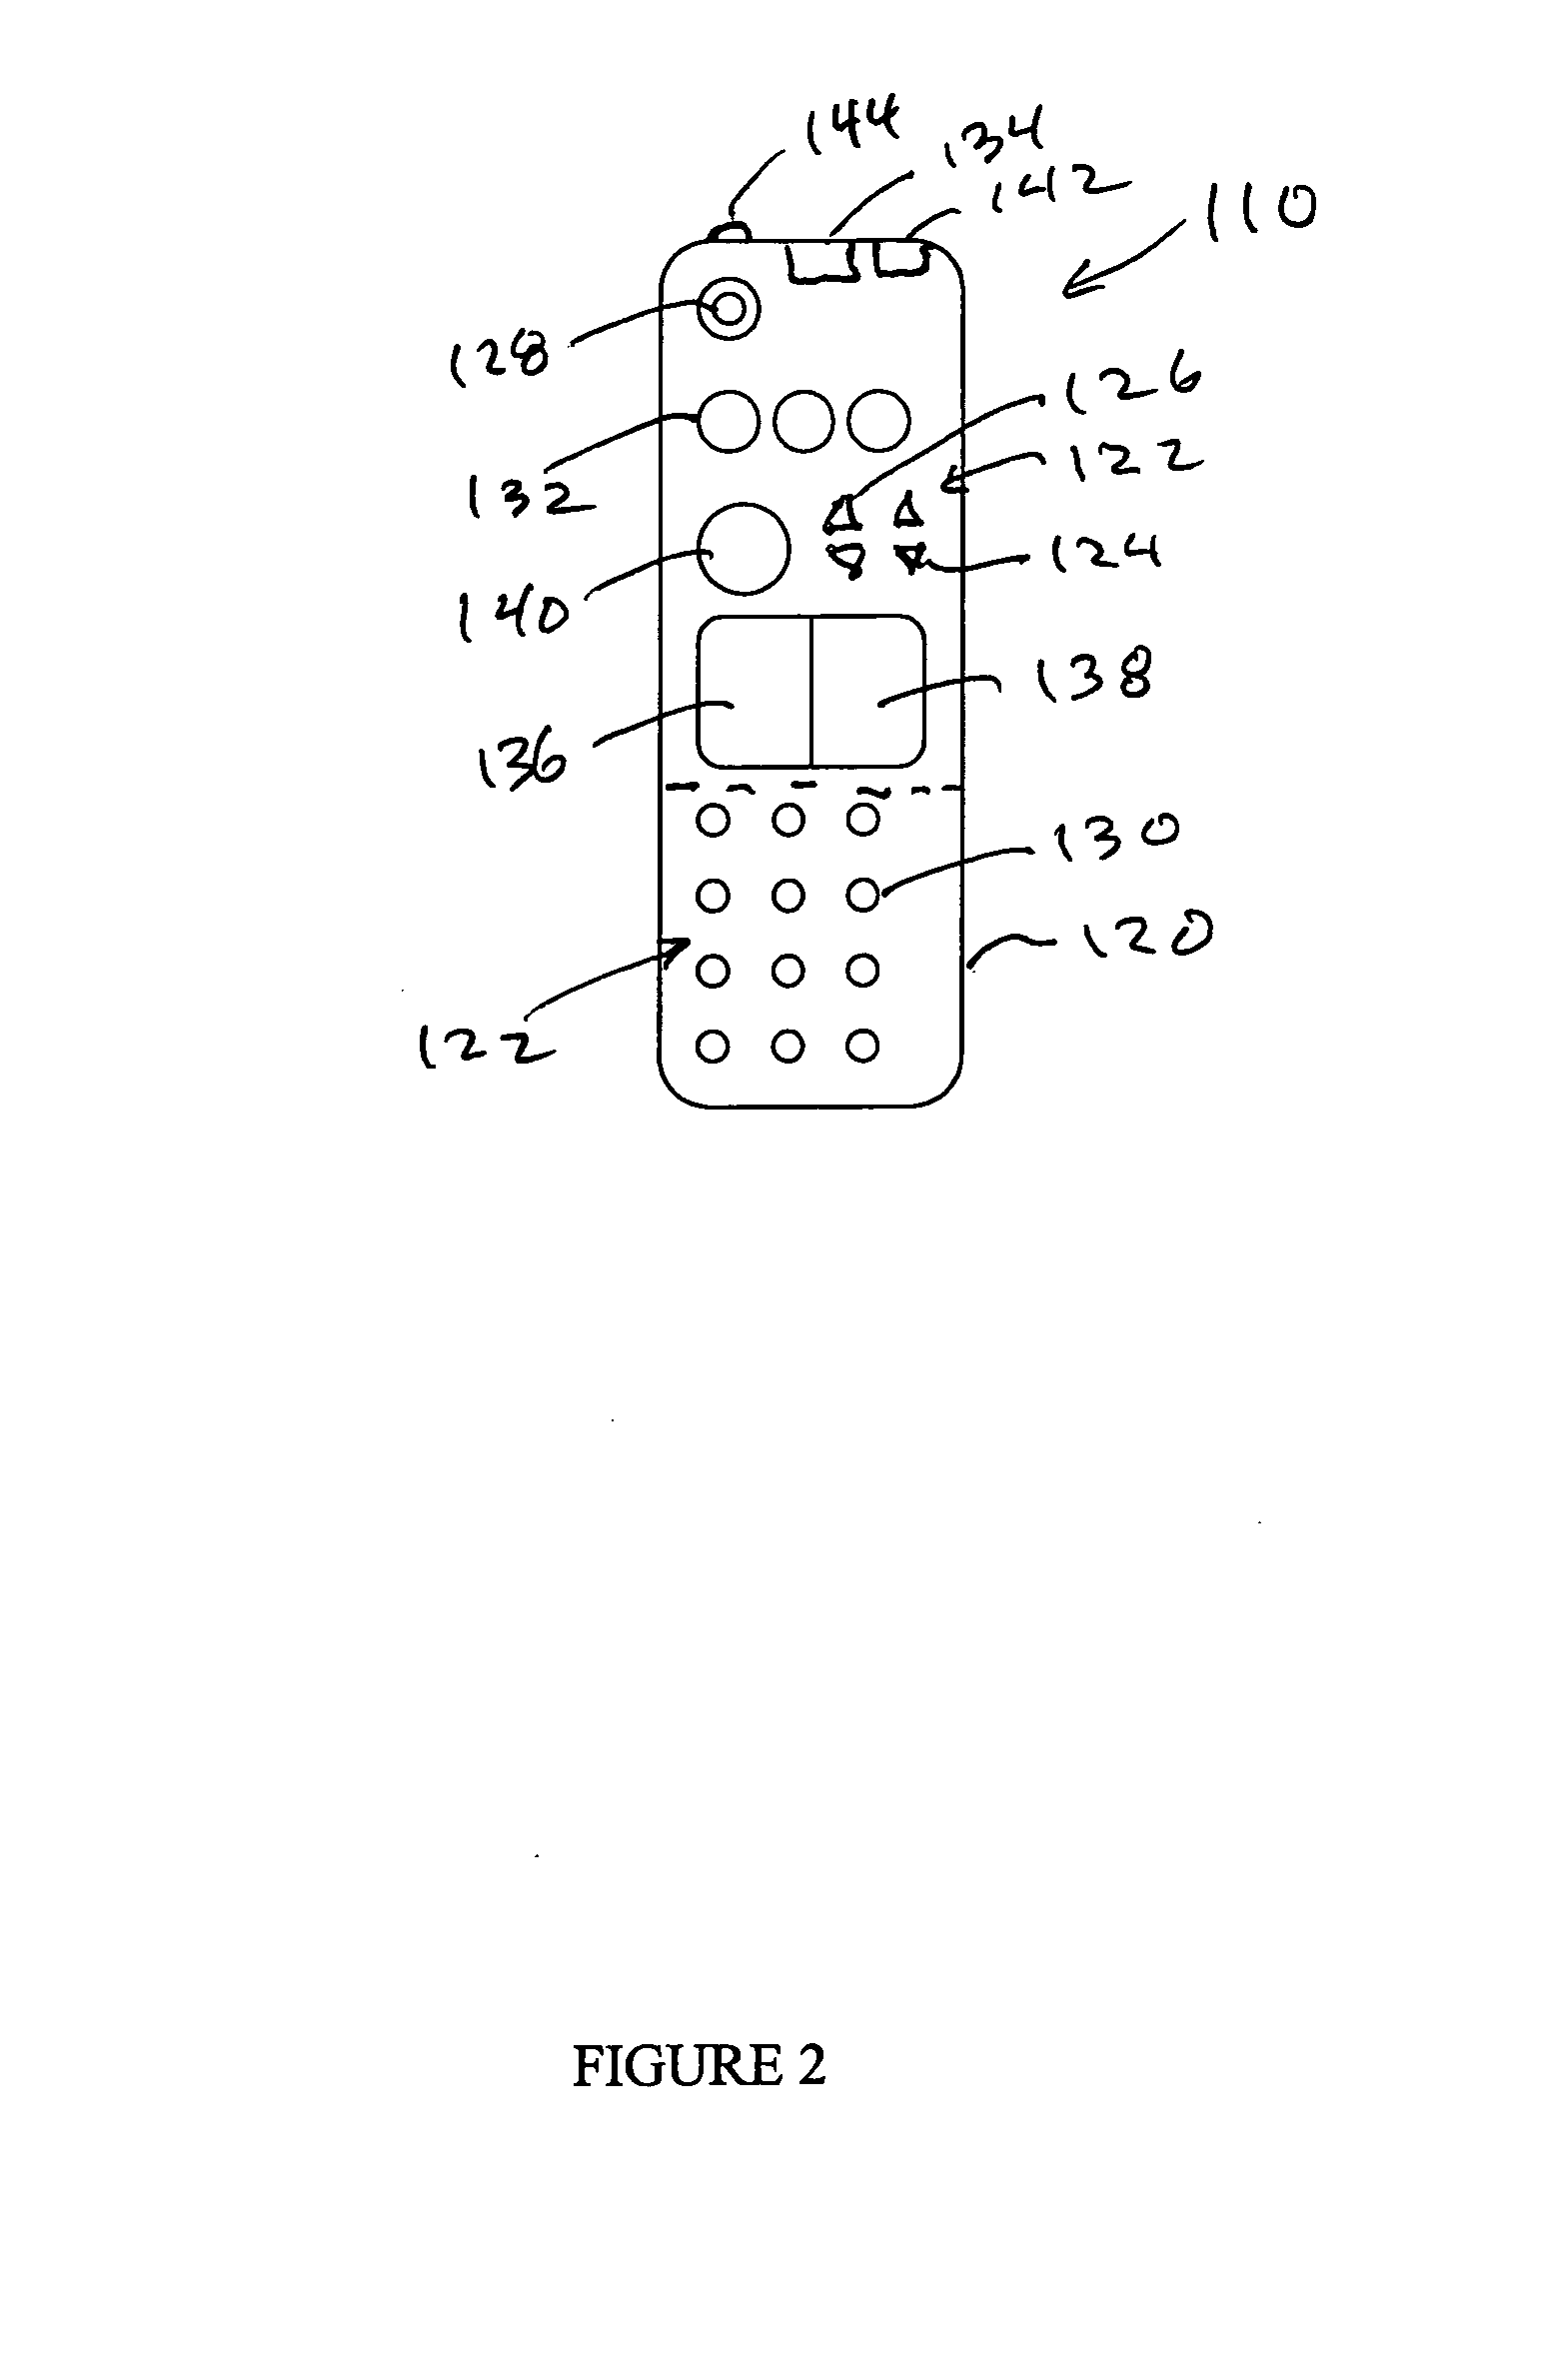 Multi-directional remote control system and method